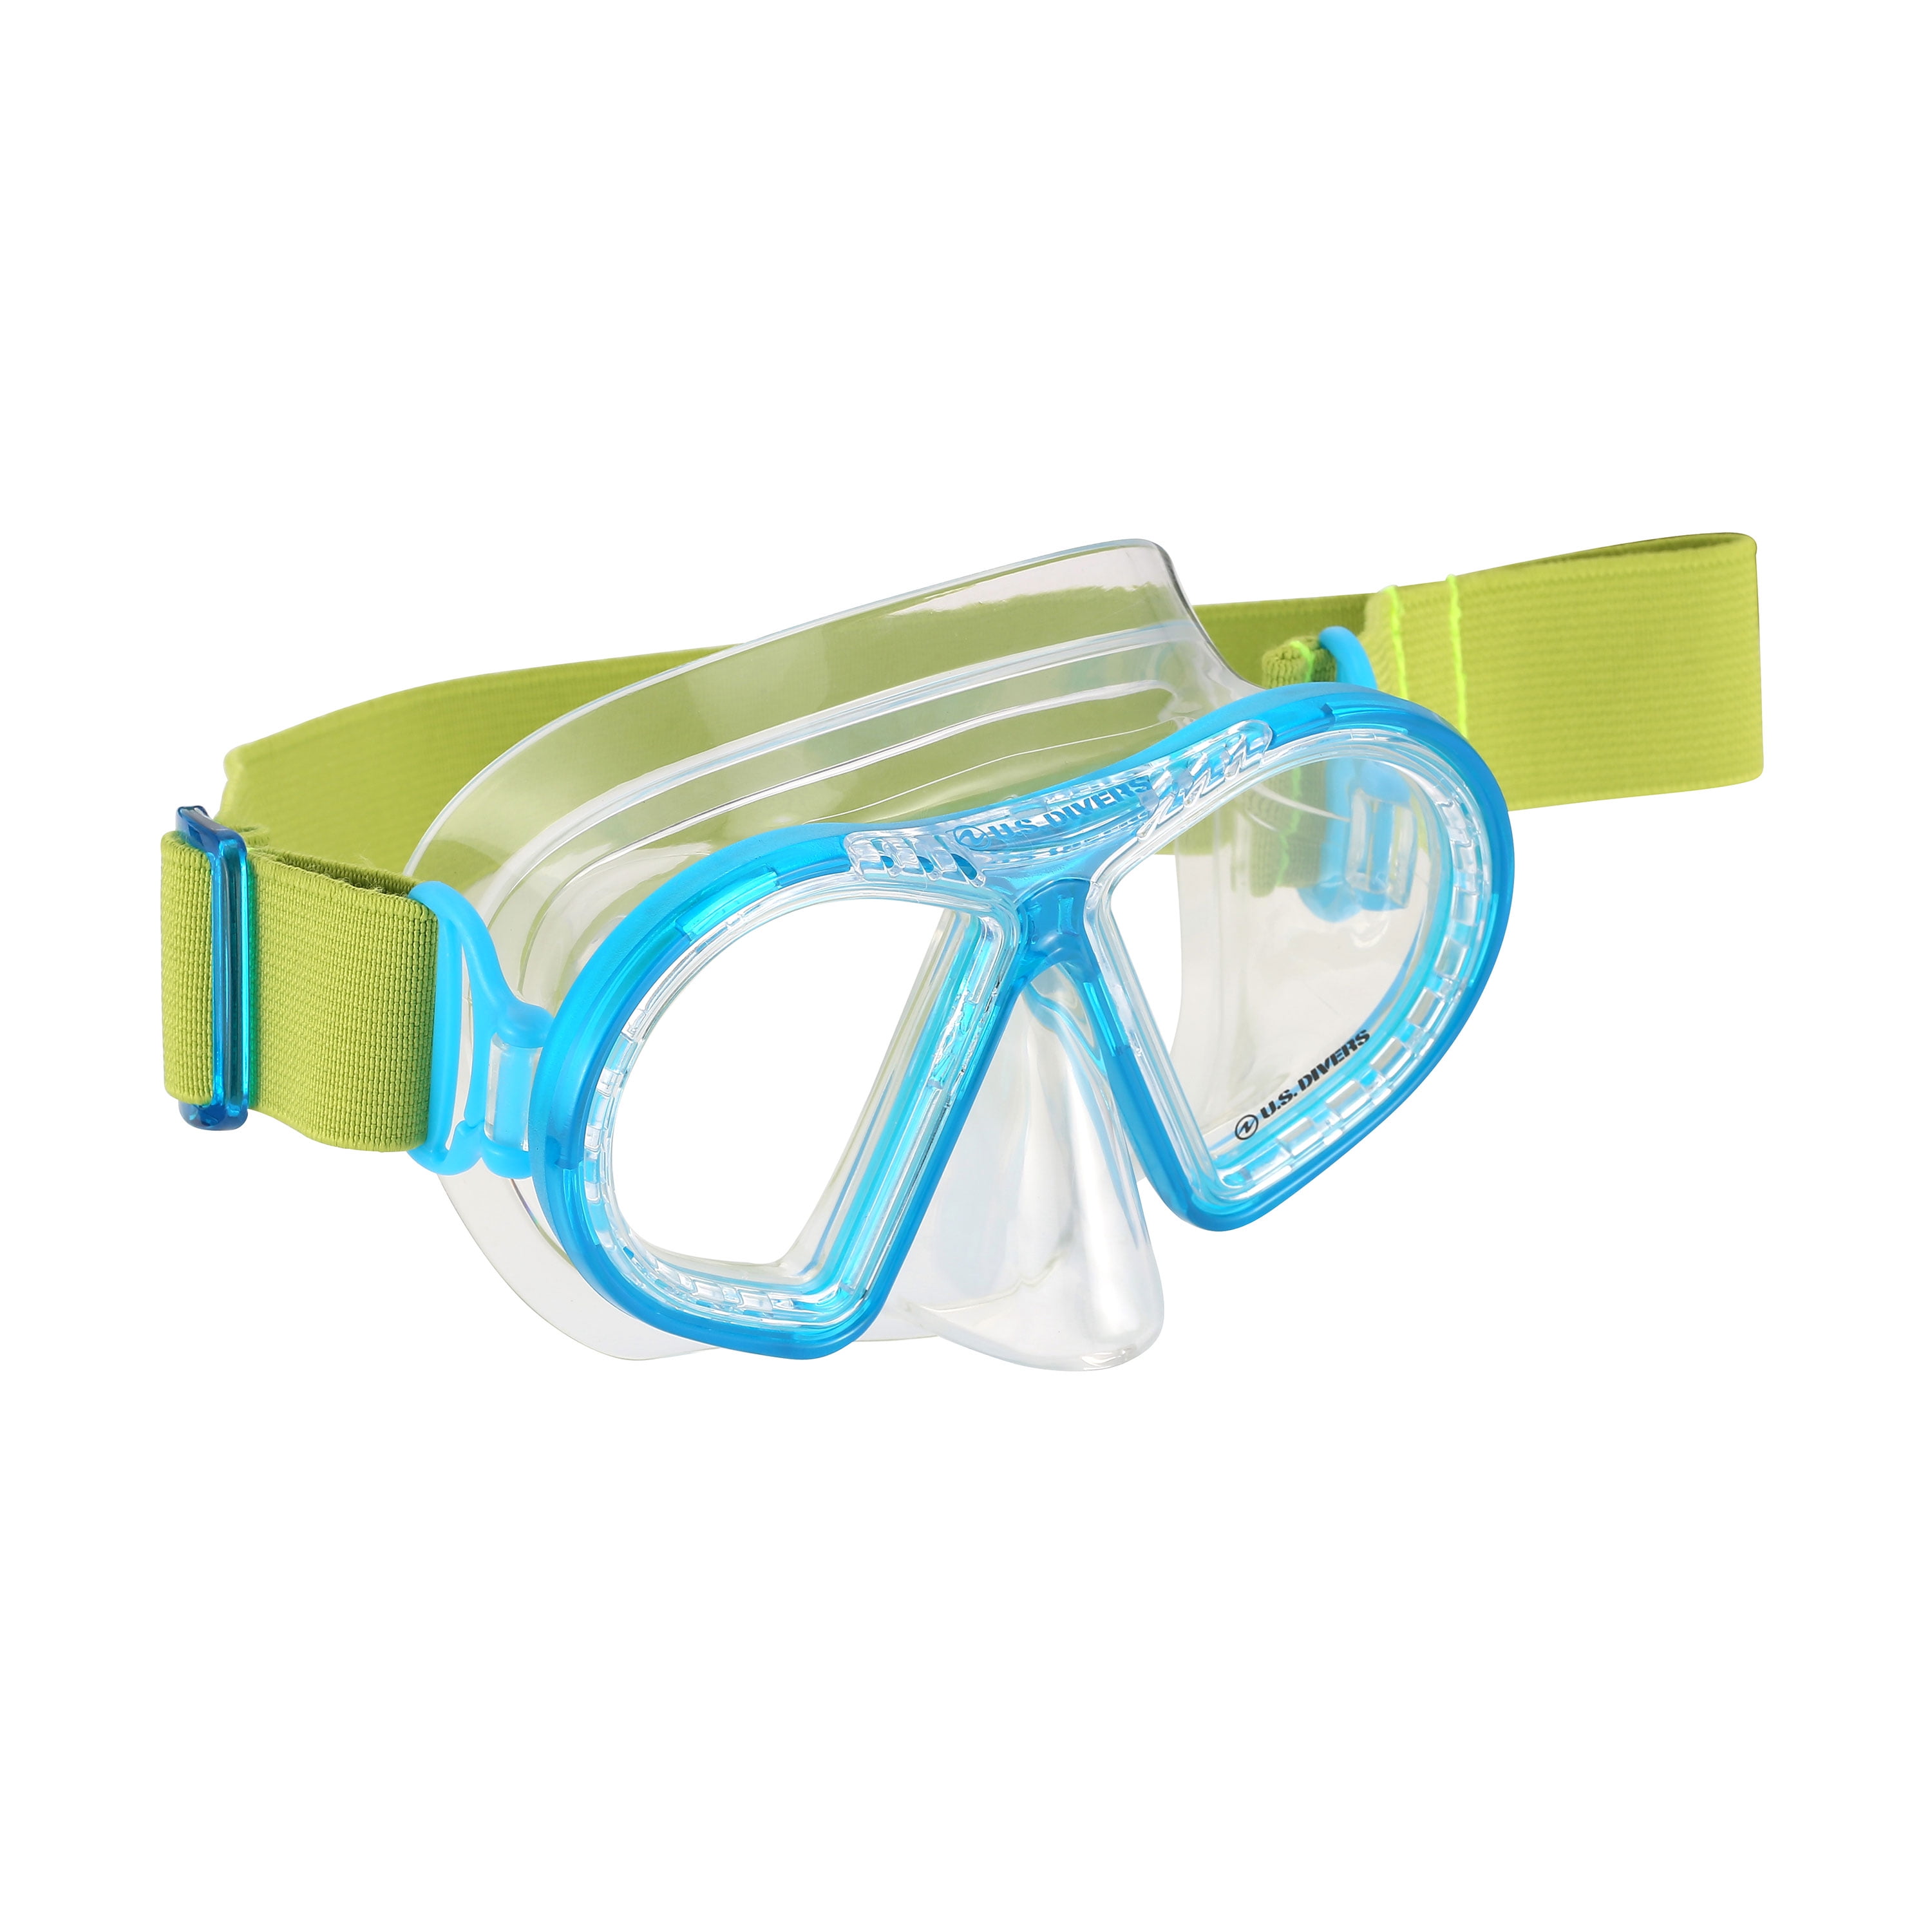 Details about   Kids Durable Yosoo Swimming Diving Snorkel Set Dive Mask Water Goggle Snorkeling 